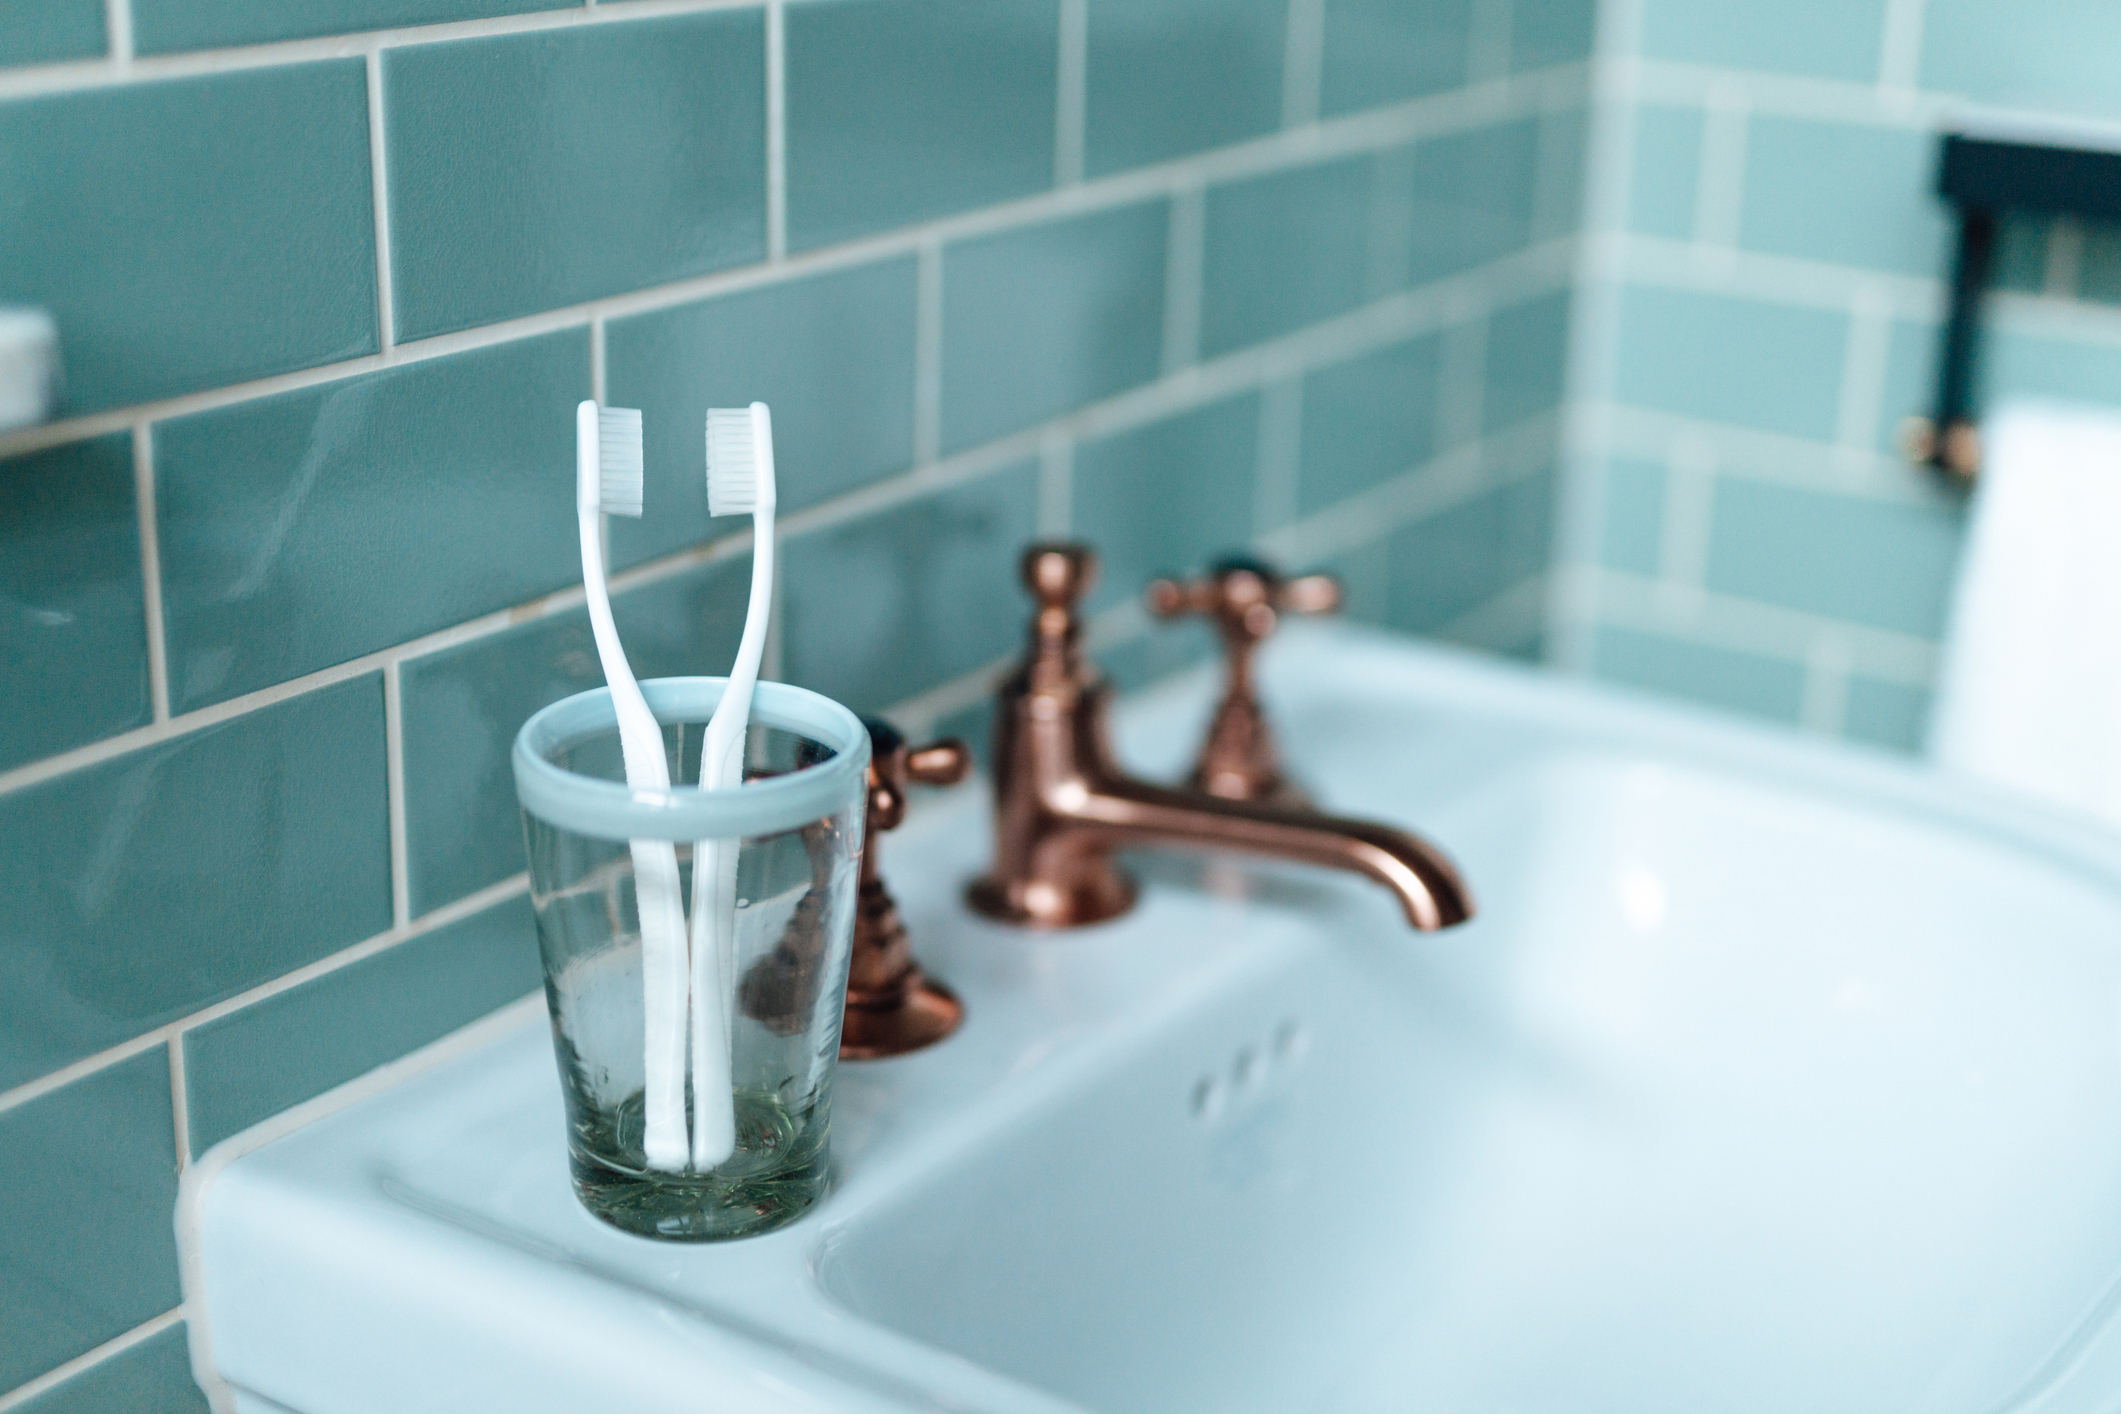 Two toothbrushes in a glass cup on a bathroom sink with bronze faucet fixtures